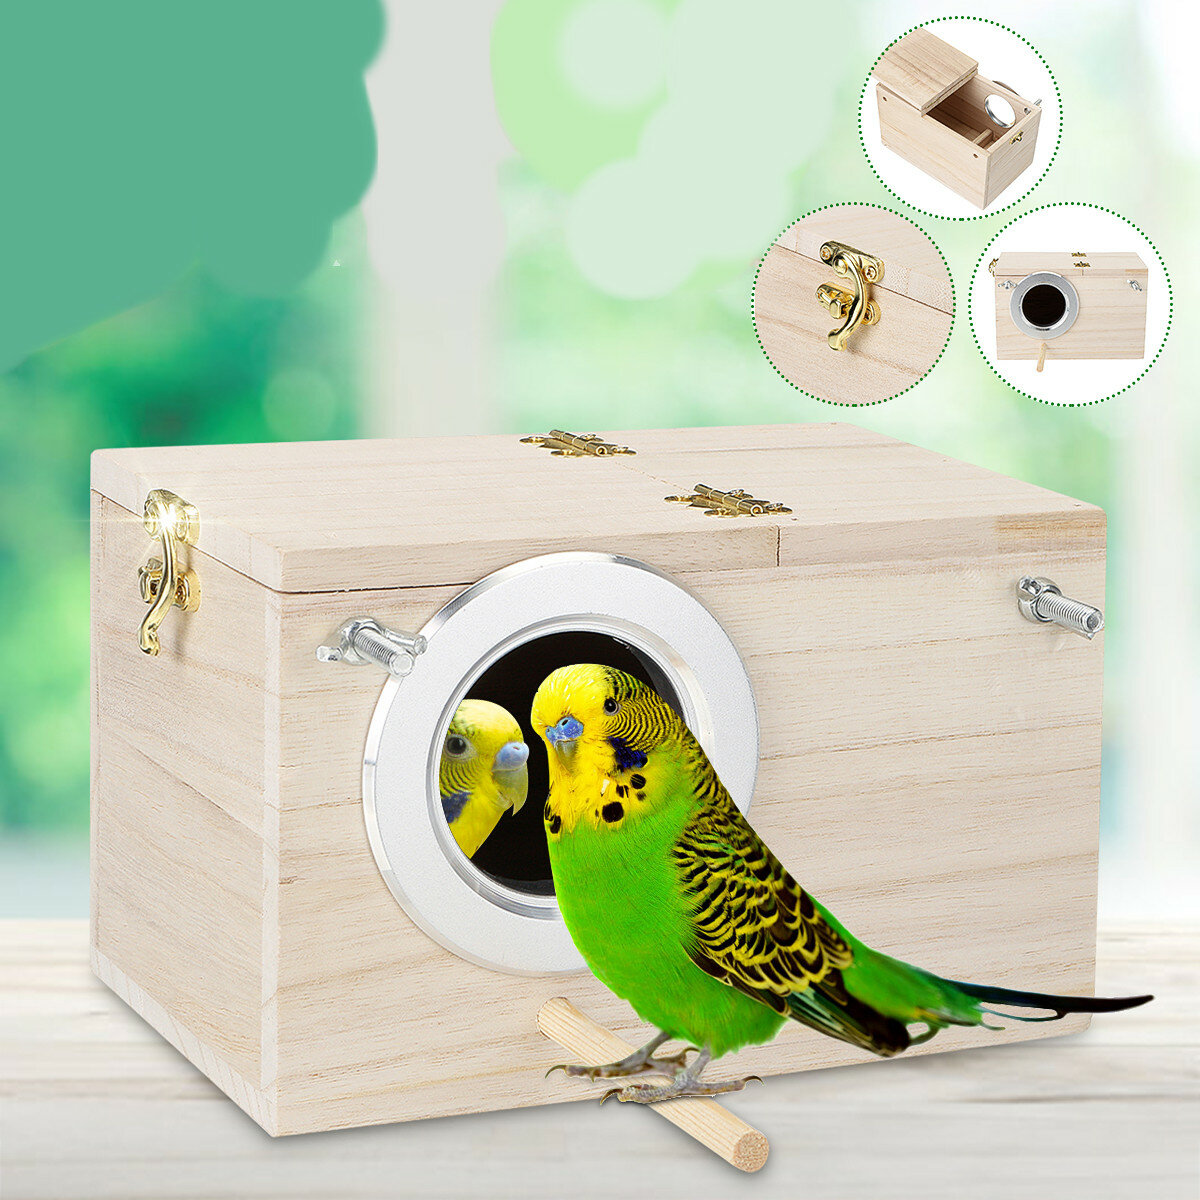 Budgie Wooden Box Breeding Boxes Aviary Bird House Nesting w/ Stick Window Security Pet Supplies Home Sleeping Cage